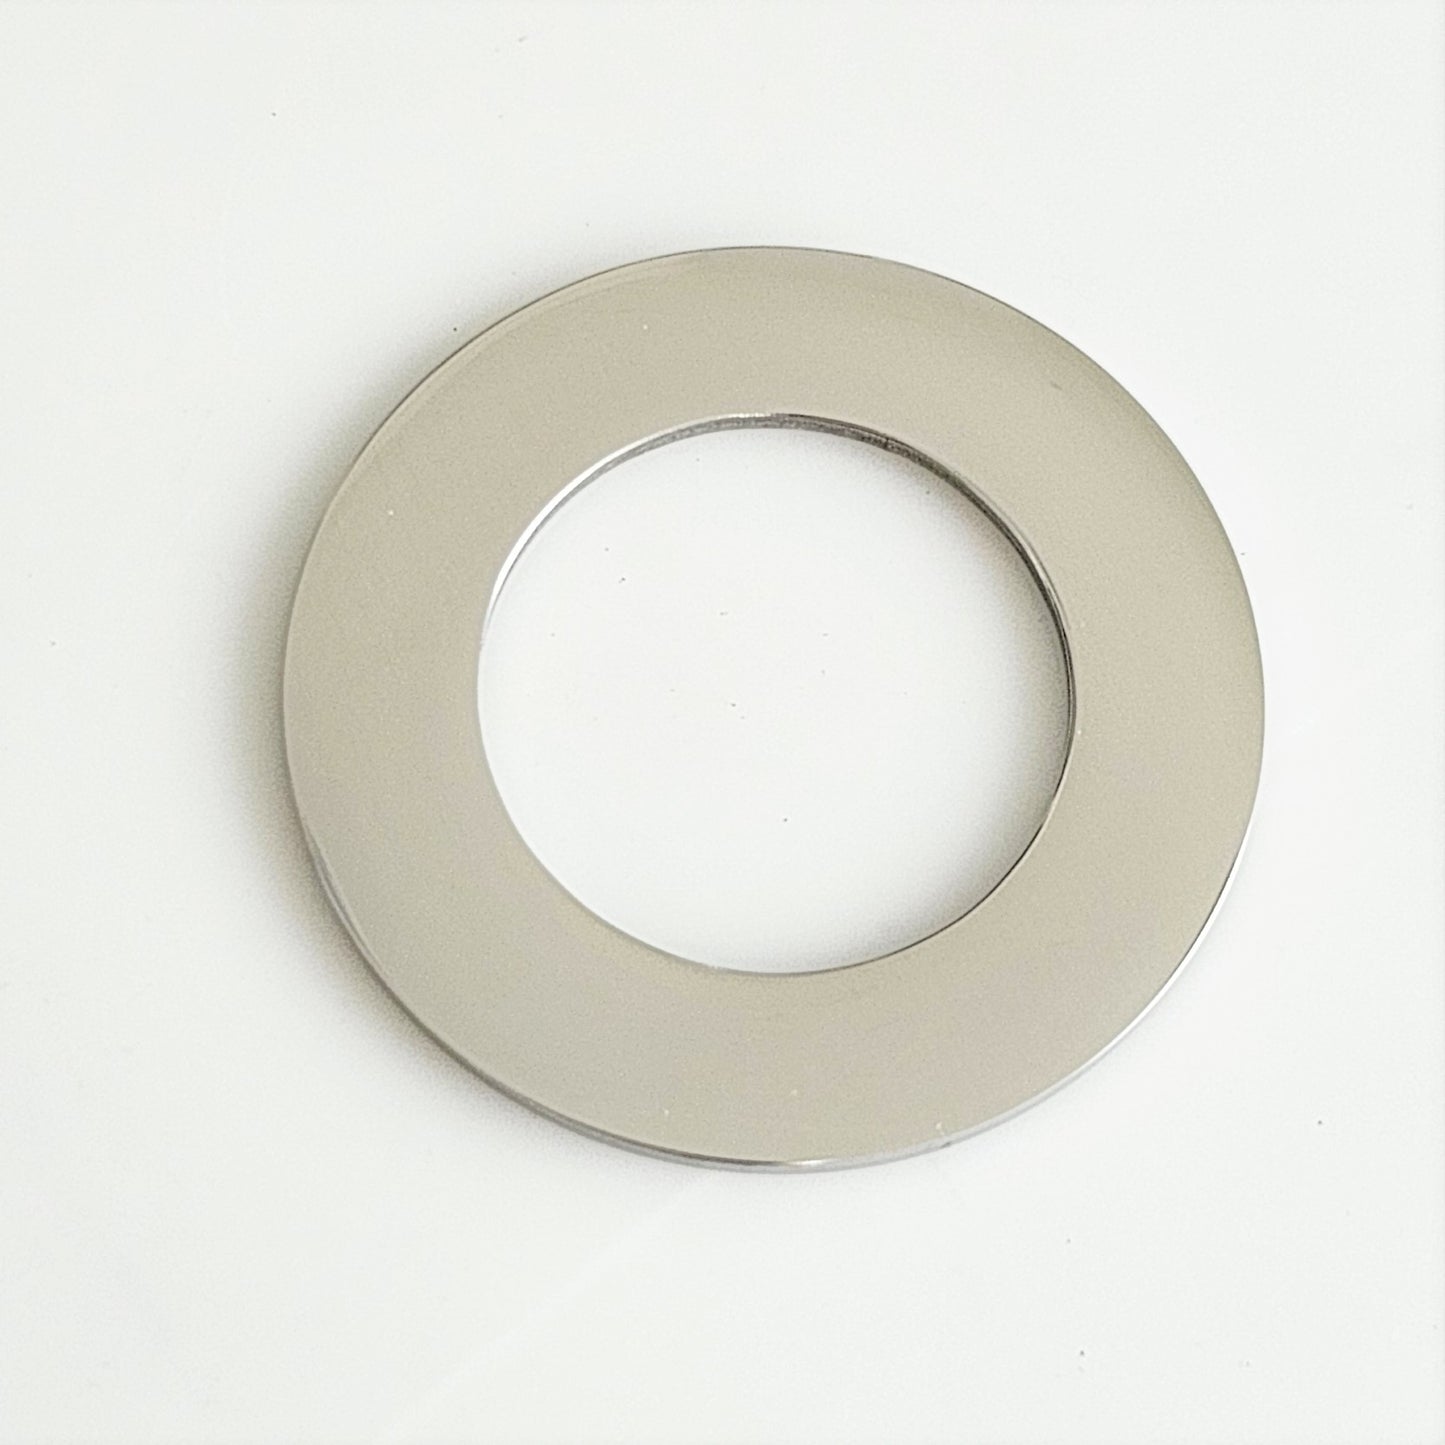 Stainless Steel - 1 1/4" Washer (no hole)